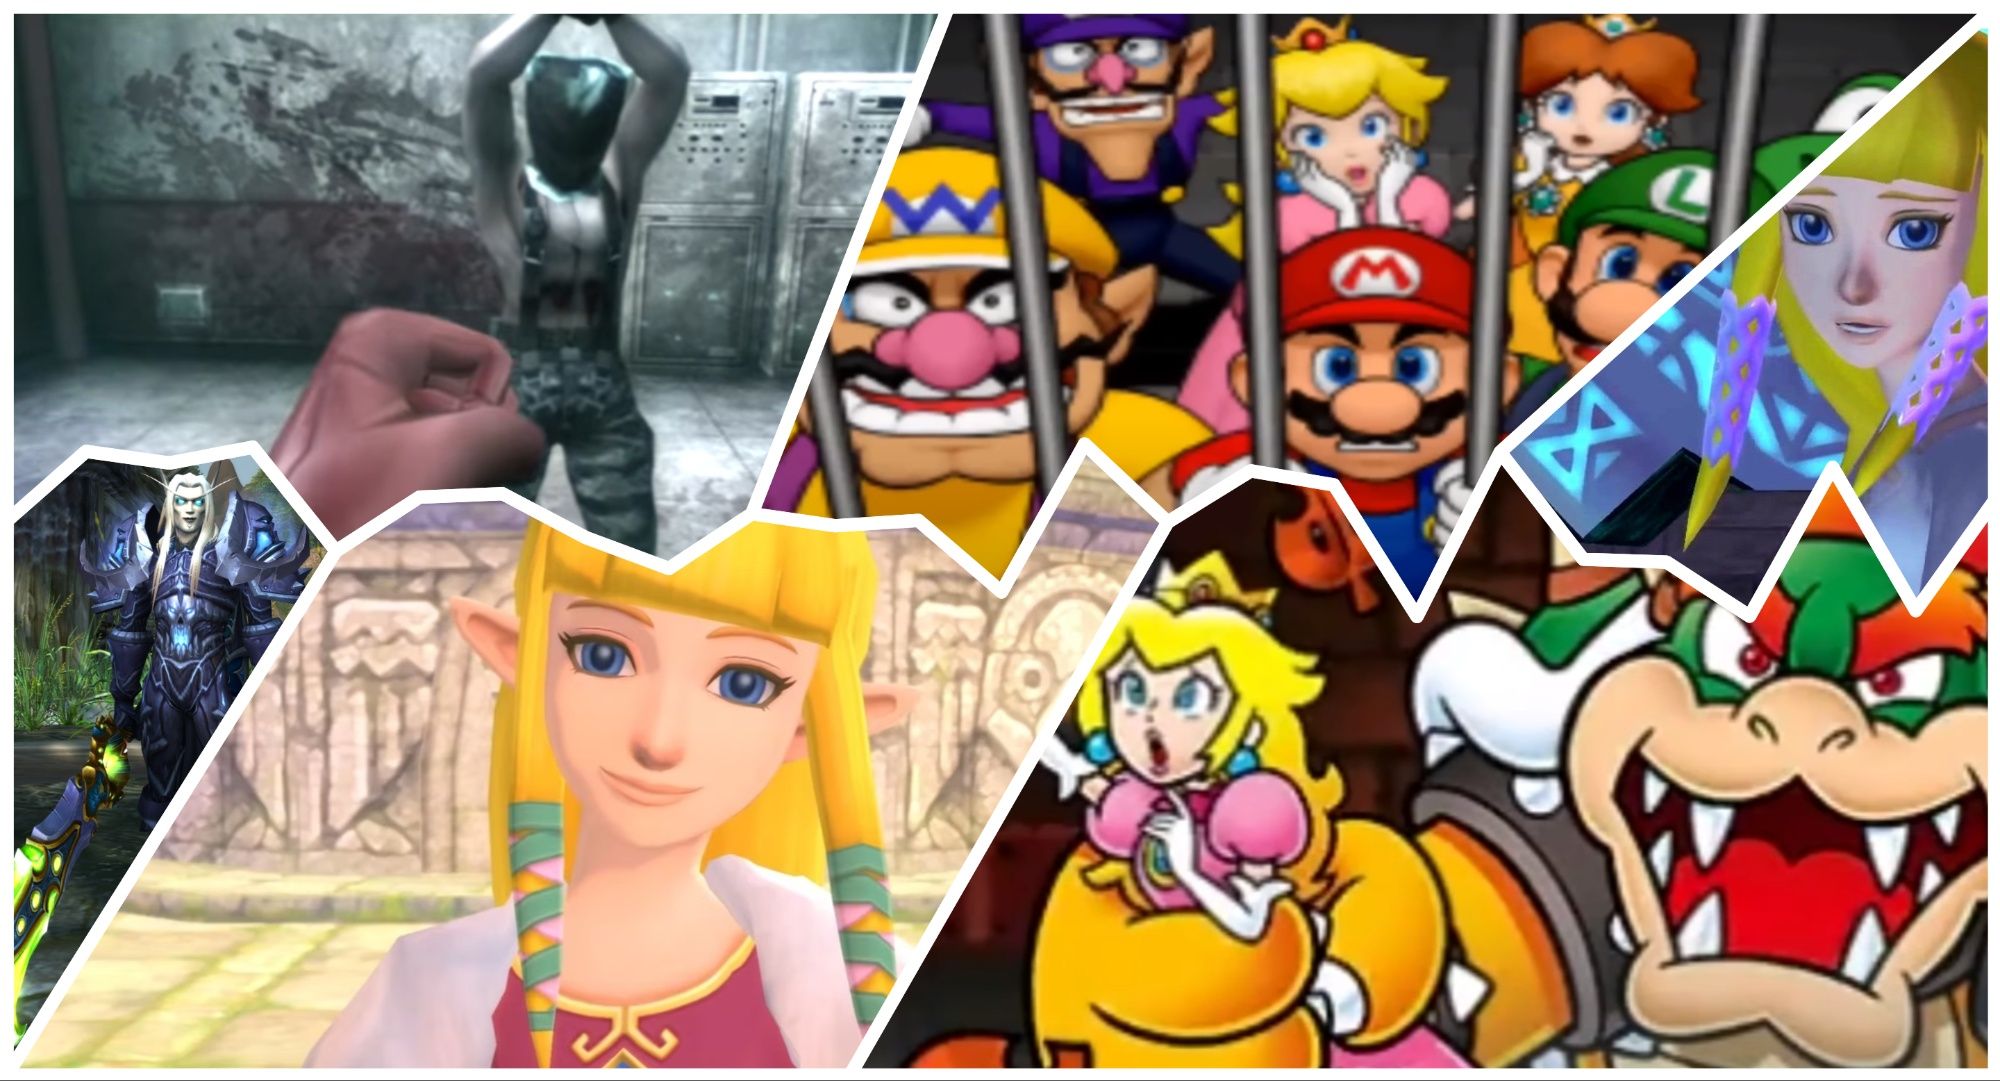 Kidnapped Characters in Metal Gear, Super Mario Bros, The Legend of Zelda and World of Warcraft